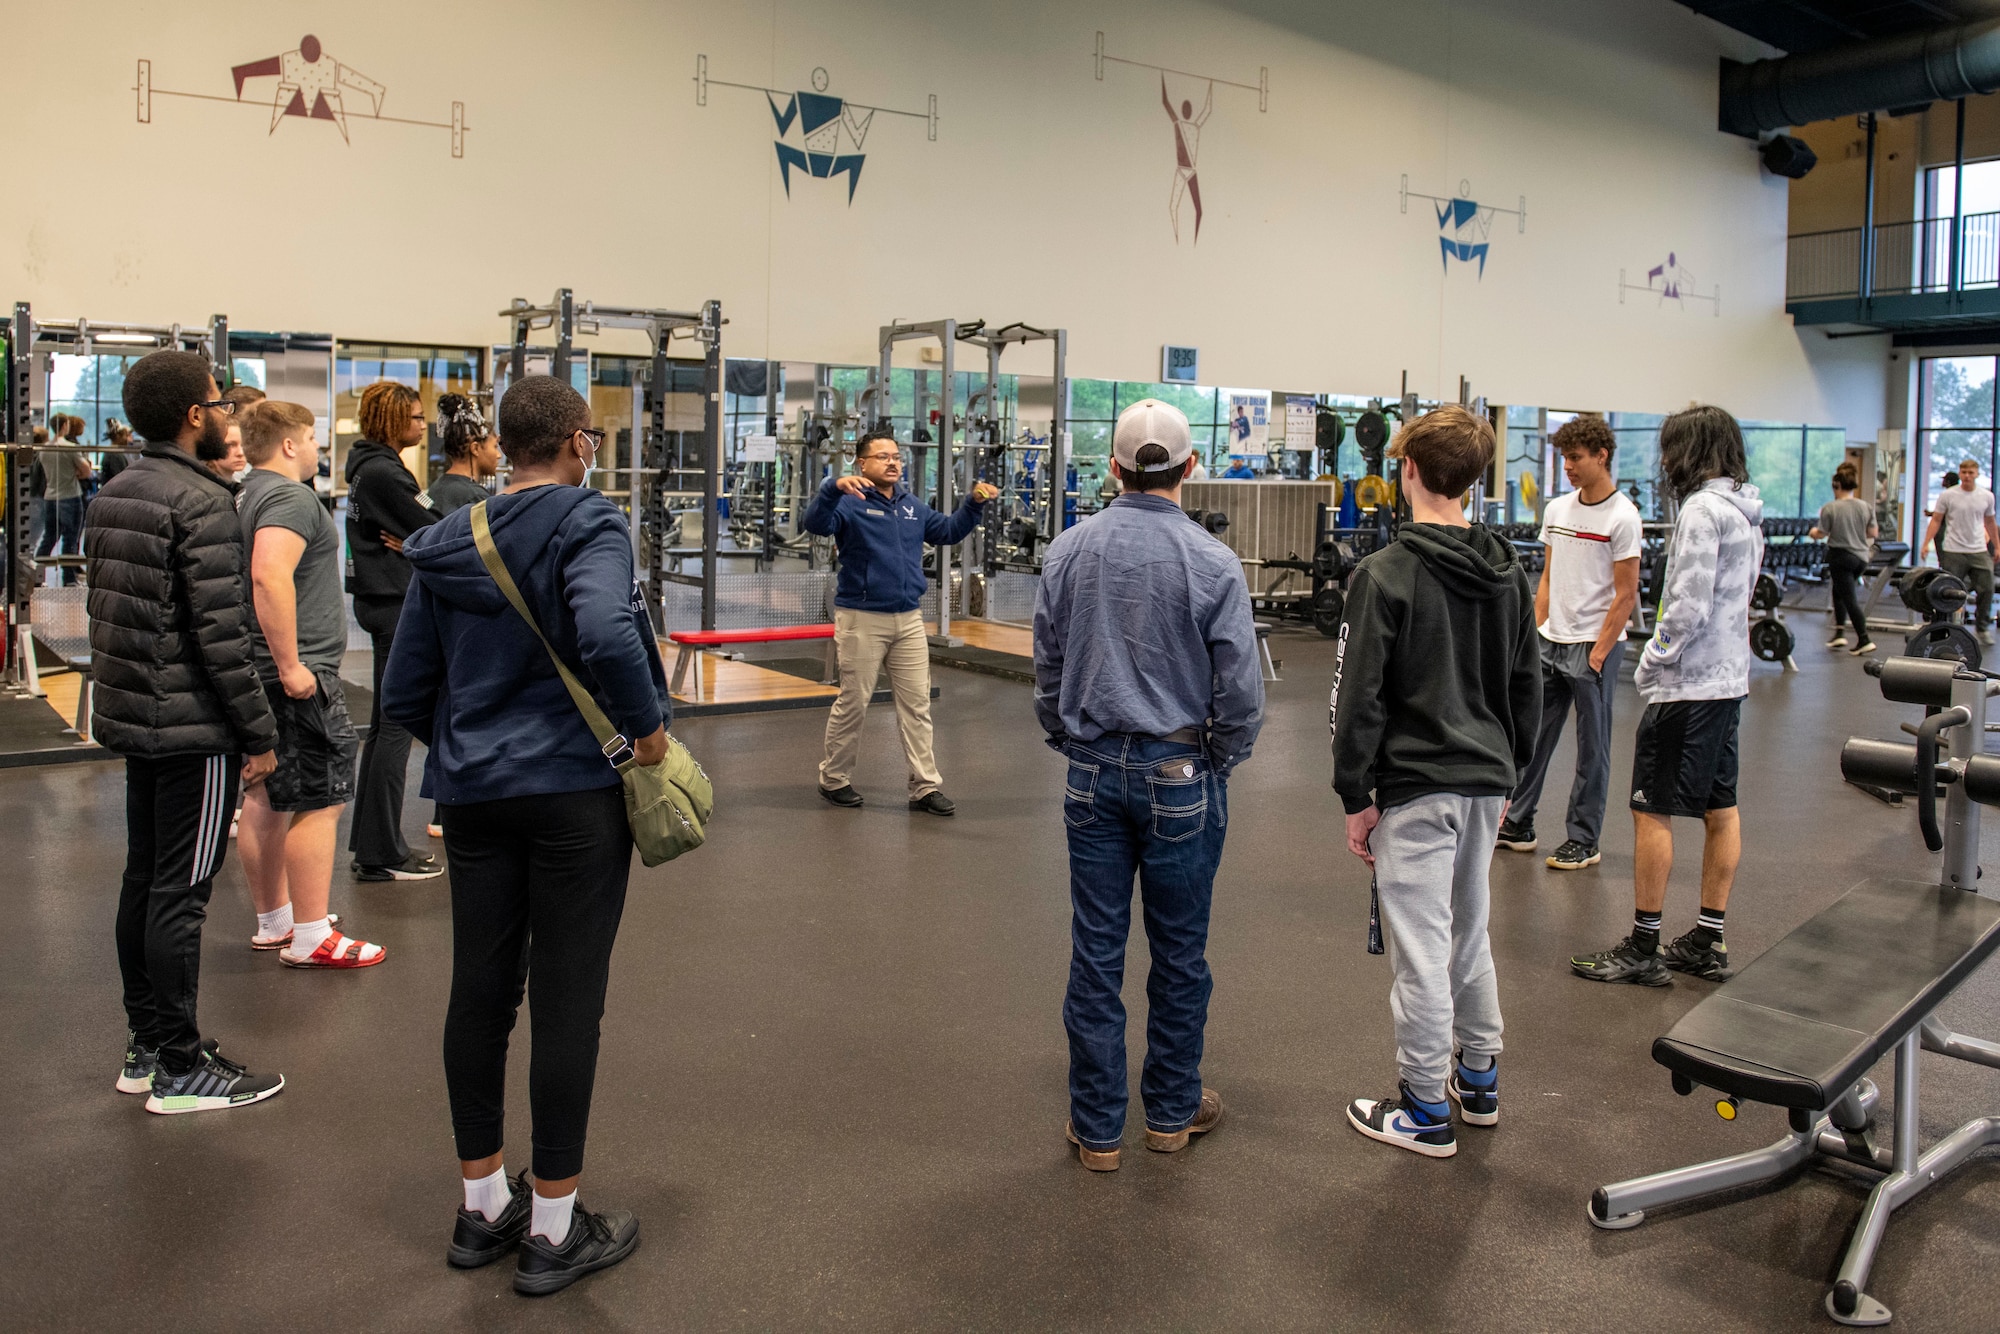 Prospective recruits tour the weight room inside the base fitness center